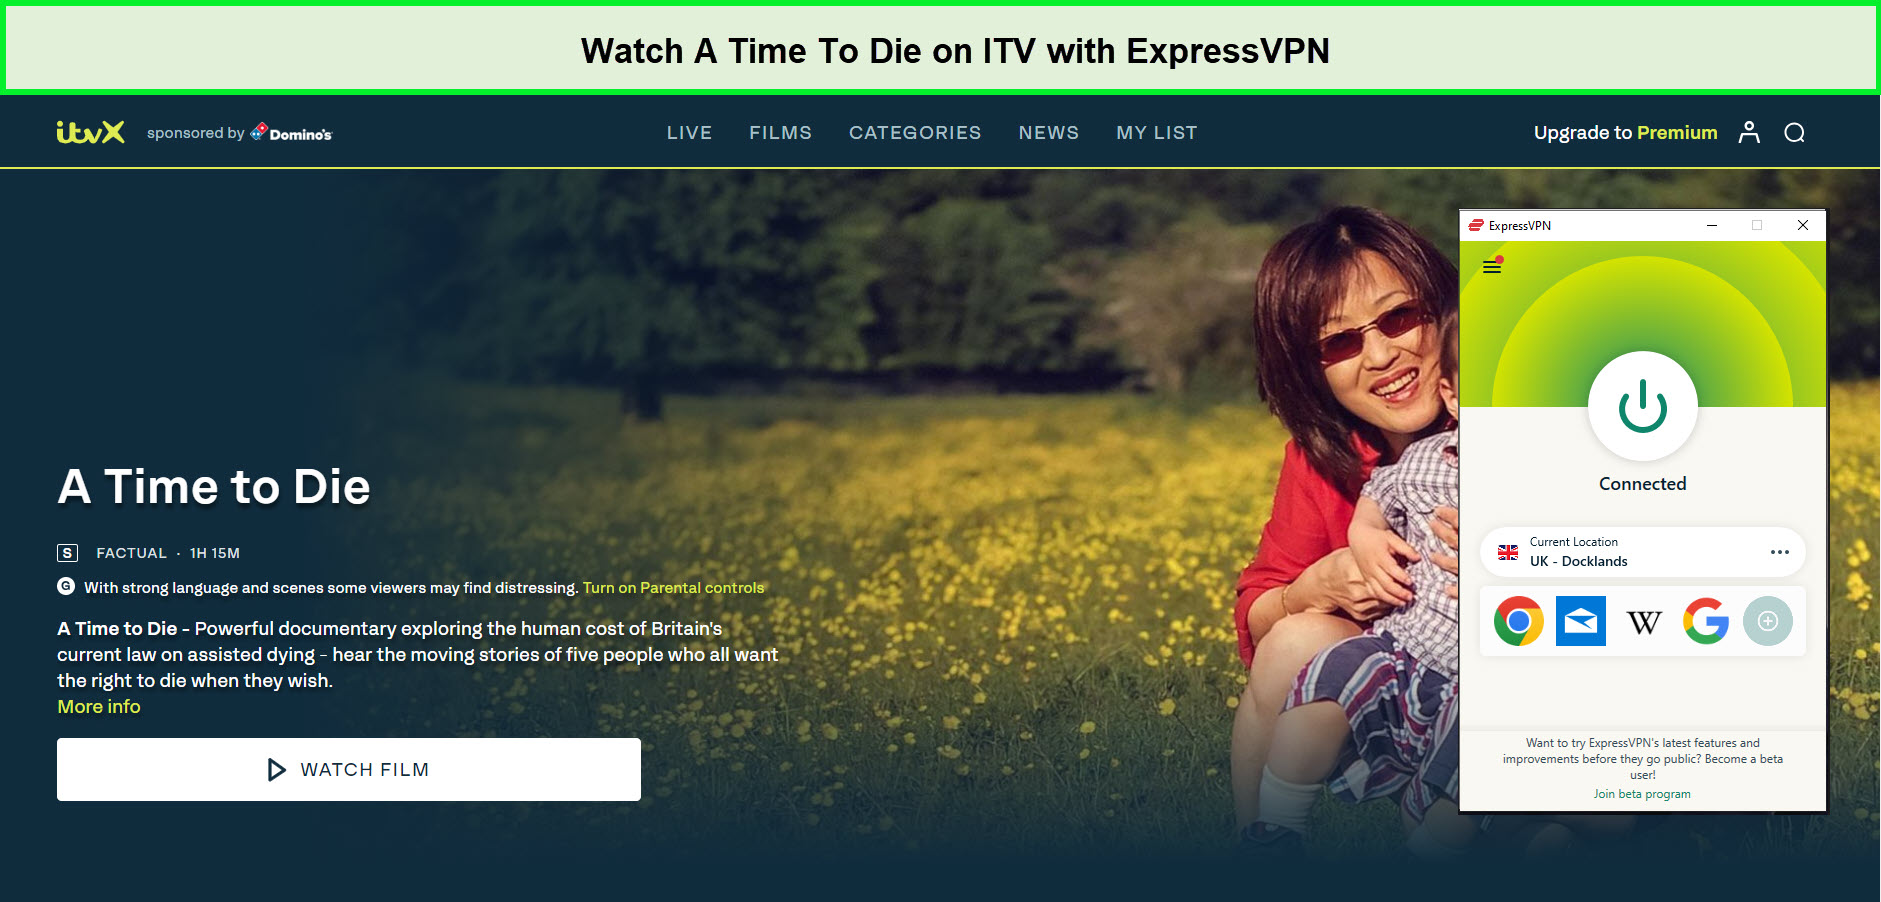 Watch-A-Time-To-Die-in-Hong Kong-on-ITV-with-ExpressVPN